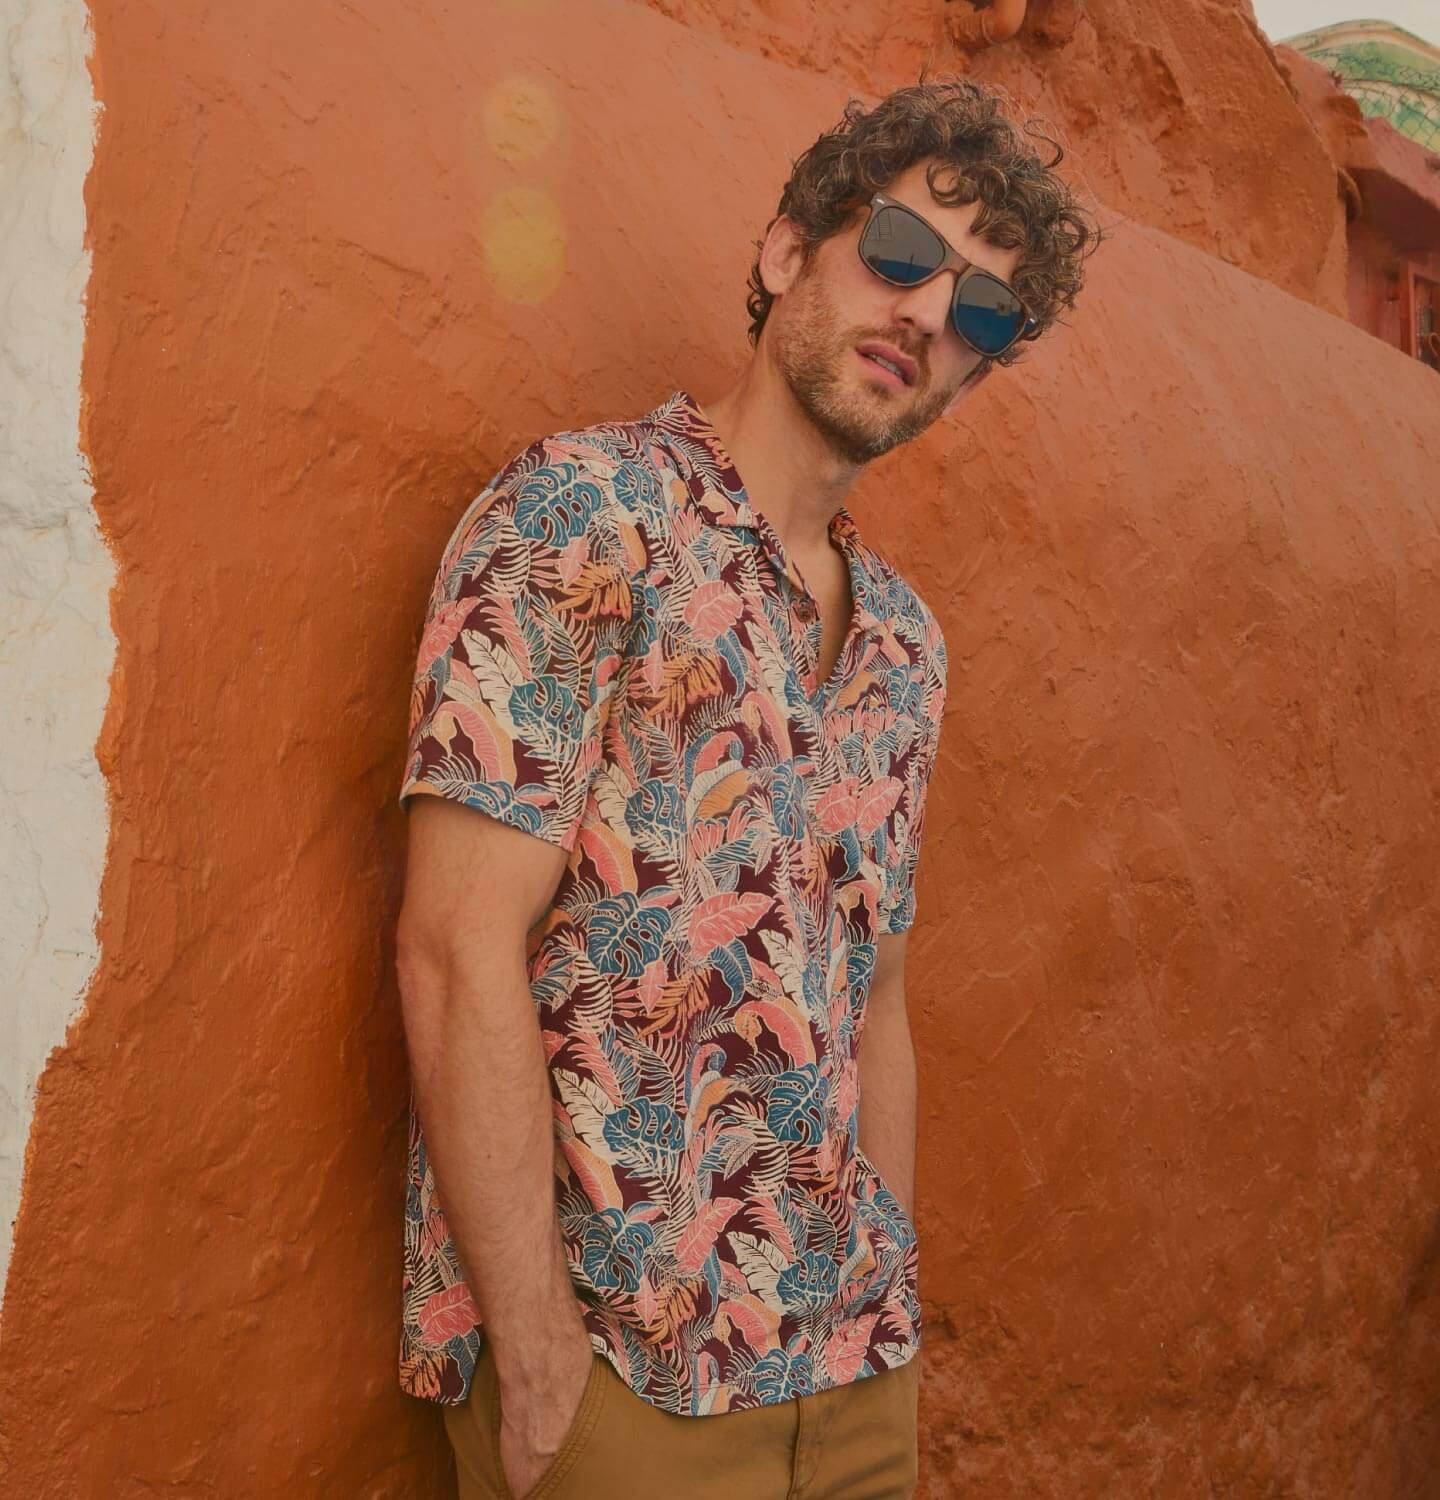 Man in sunglasses wearing a patterned short sleeved shirt and leaning against an orange wall